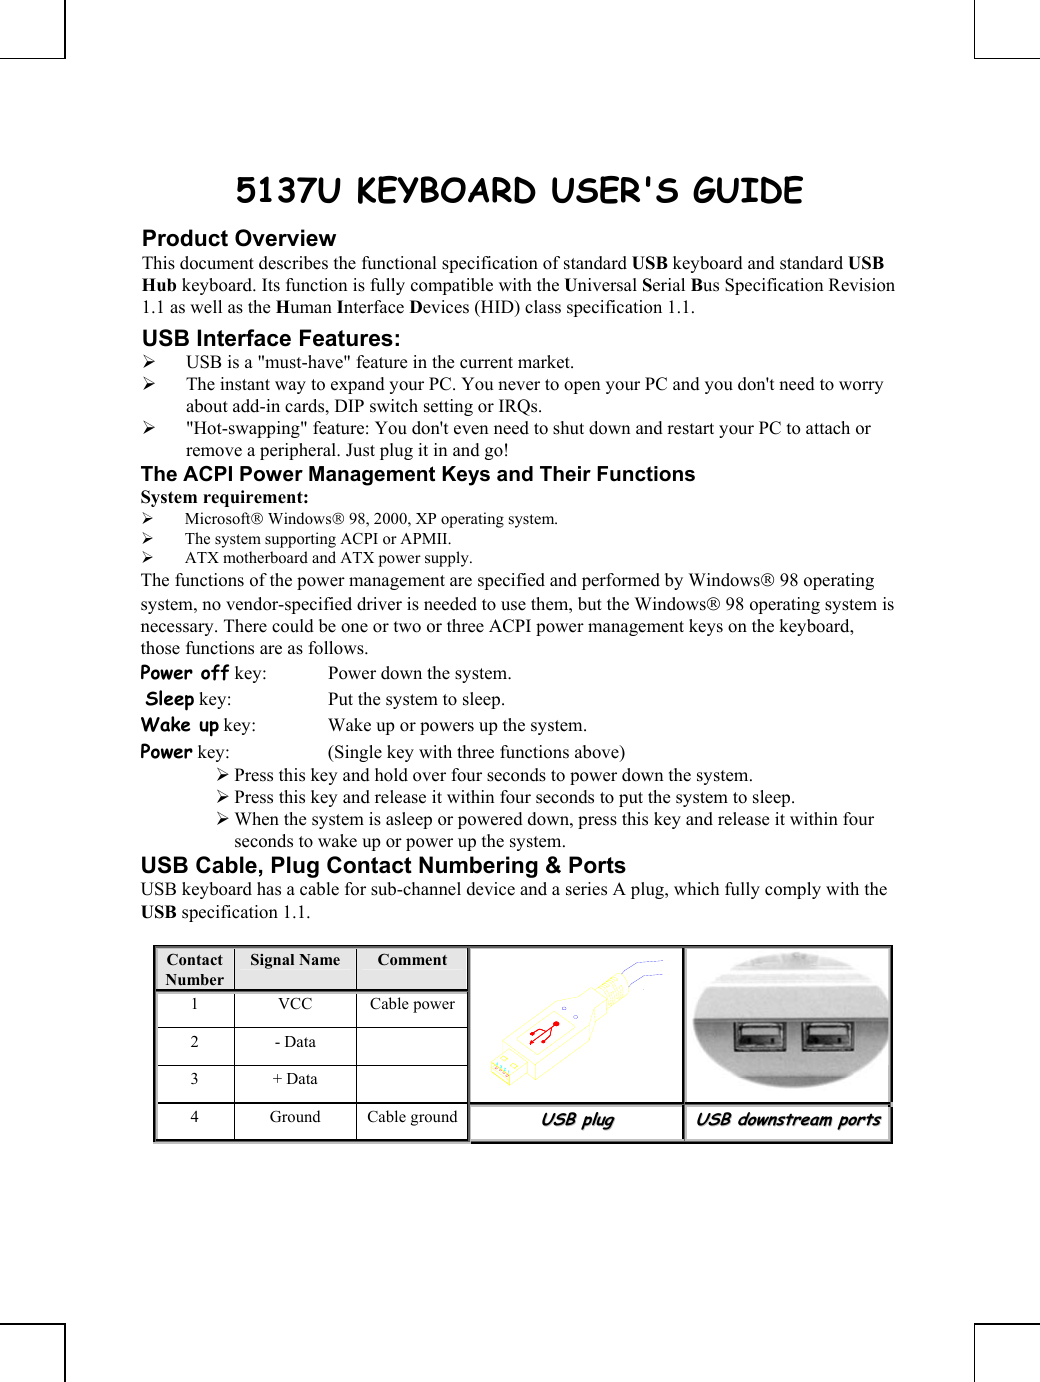       5137U KEYBOARD USER&apos;S GUIDE Product Overview This document describes the functional specification of standard USB keyboard and standard USB Hub keyboard. Its function is fully compatible with the Universal Serial Bus Specification Revision 1.1 as well as the Human Interface Devices (HID) class specification 1.1. USB Interface Features: ¾ USB is a &quot;must-have&quot; feature in the current market. ¾ The instant way to expand your PC. You never to open your PC and you don&apos;t need to worry about add-in cards, DIP switch setting or IRQs. ¾ &quot;Hot-swapping&quot; feature: You don&apos;t even need to shut down and restart your PC to attach or remove a peripheral. Just plug it in and go! The ACPI Power Management Keys and Their Functions System requirement:  ¾ Microsoft Windows 98, 2000, XP operating system. ¾ The system supporting ACPI or APMII. ¾ ATX motherboard and ATX power supply. The functions of the power management are specified and performed by Windows 98 operating system, no vendor-specified driver is needed to use them, but the Windows 98 operating system is necessary. There could be one or two or three ACPI power management keys on the keyboard, those functions are as follows. Power off key:  Power down the system.  Sleep key:  Put the system to sleep.  Wake up key:  Wake up or powers up the system.  Power key:  (Single key with three functions above)      ¾ Press this key and hold over four seconds to power down the system. ¾ Press this key and release it within four seconds to put the system to sleep. ¾ When the system is asleep or powered down, press this key and release it within four seconds to wake up or power up the system. USB Cable, Plug Contact Numbering &amp; Ports USB keyboard has a cable for sub-channel device and a series A plug, which fully comply with the USB specification 1.1.  Contact Number Signal Name   Comment 1 VCC Cable power2 - Data   3 + Data    4 Ground Cable groundUUSSBB  pplluugg  UUSSBB  ddoowwnnssttrreeaamm  ppoorrttss    